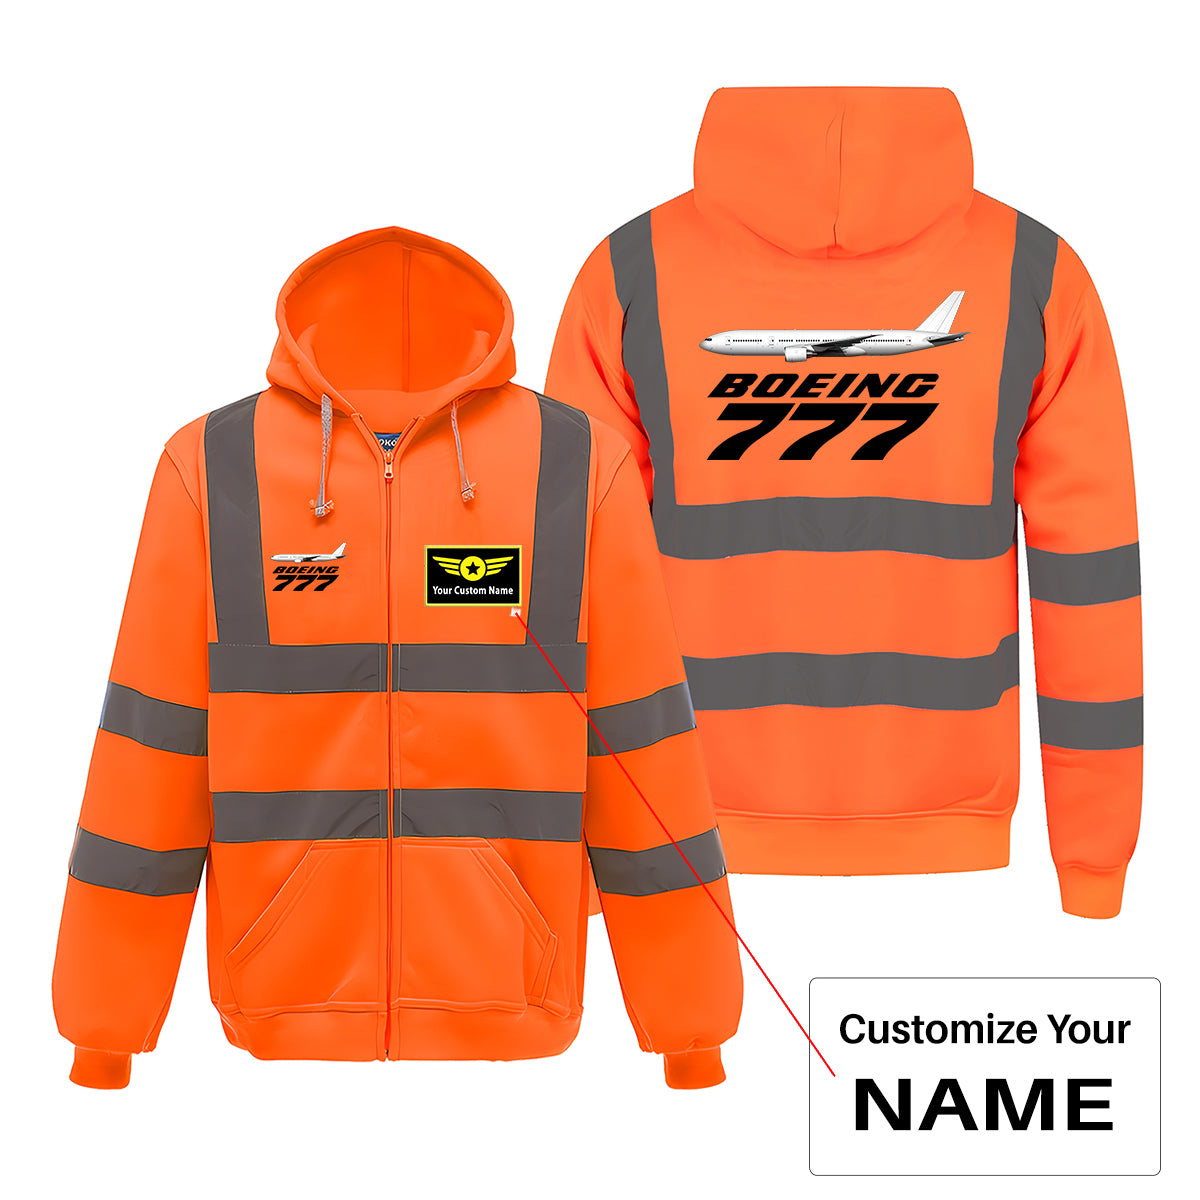 The Boeing 777 Designed Reflective Zipped Hoodies